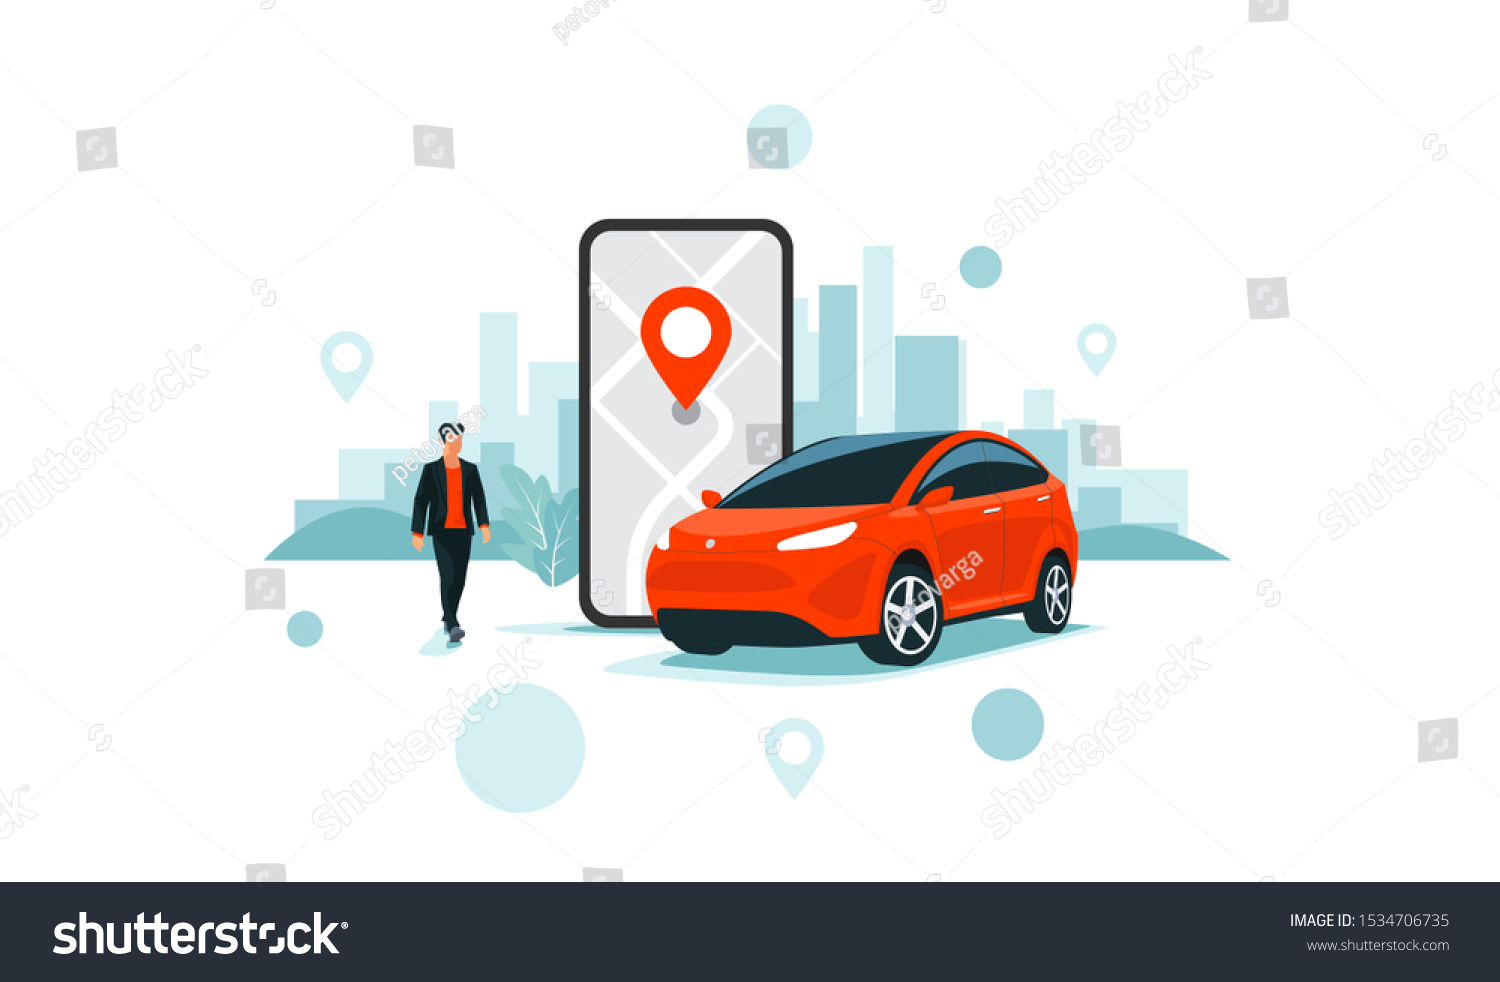 Vector illustration of autonomous online car sharing service controlled via smartphone app. Phone with location mark and smart car with modern city skyline. Isolated connected vehicle remote parking.  #1534706735